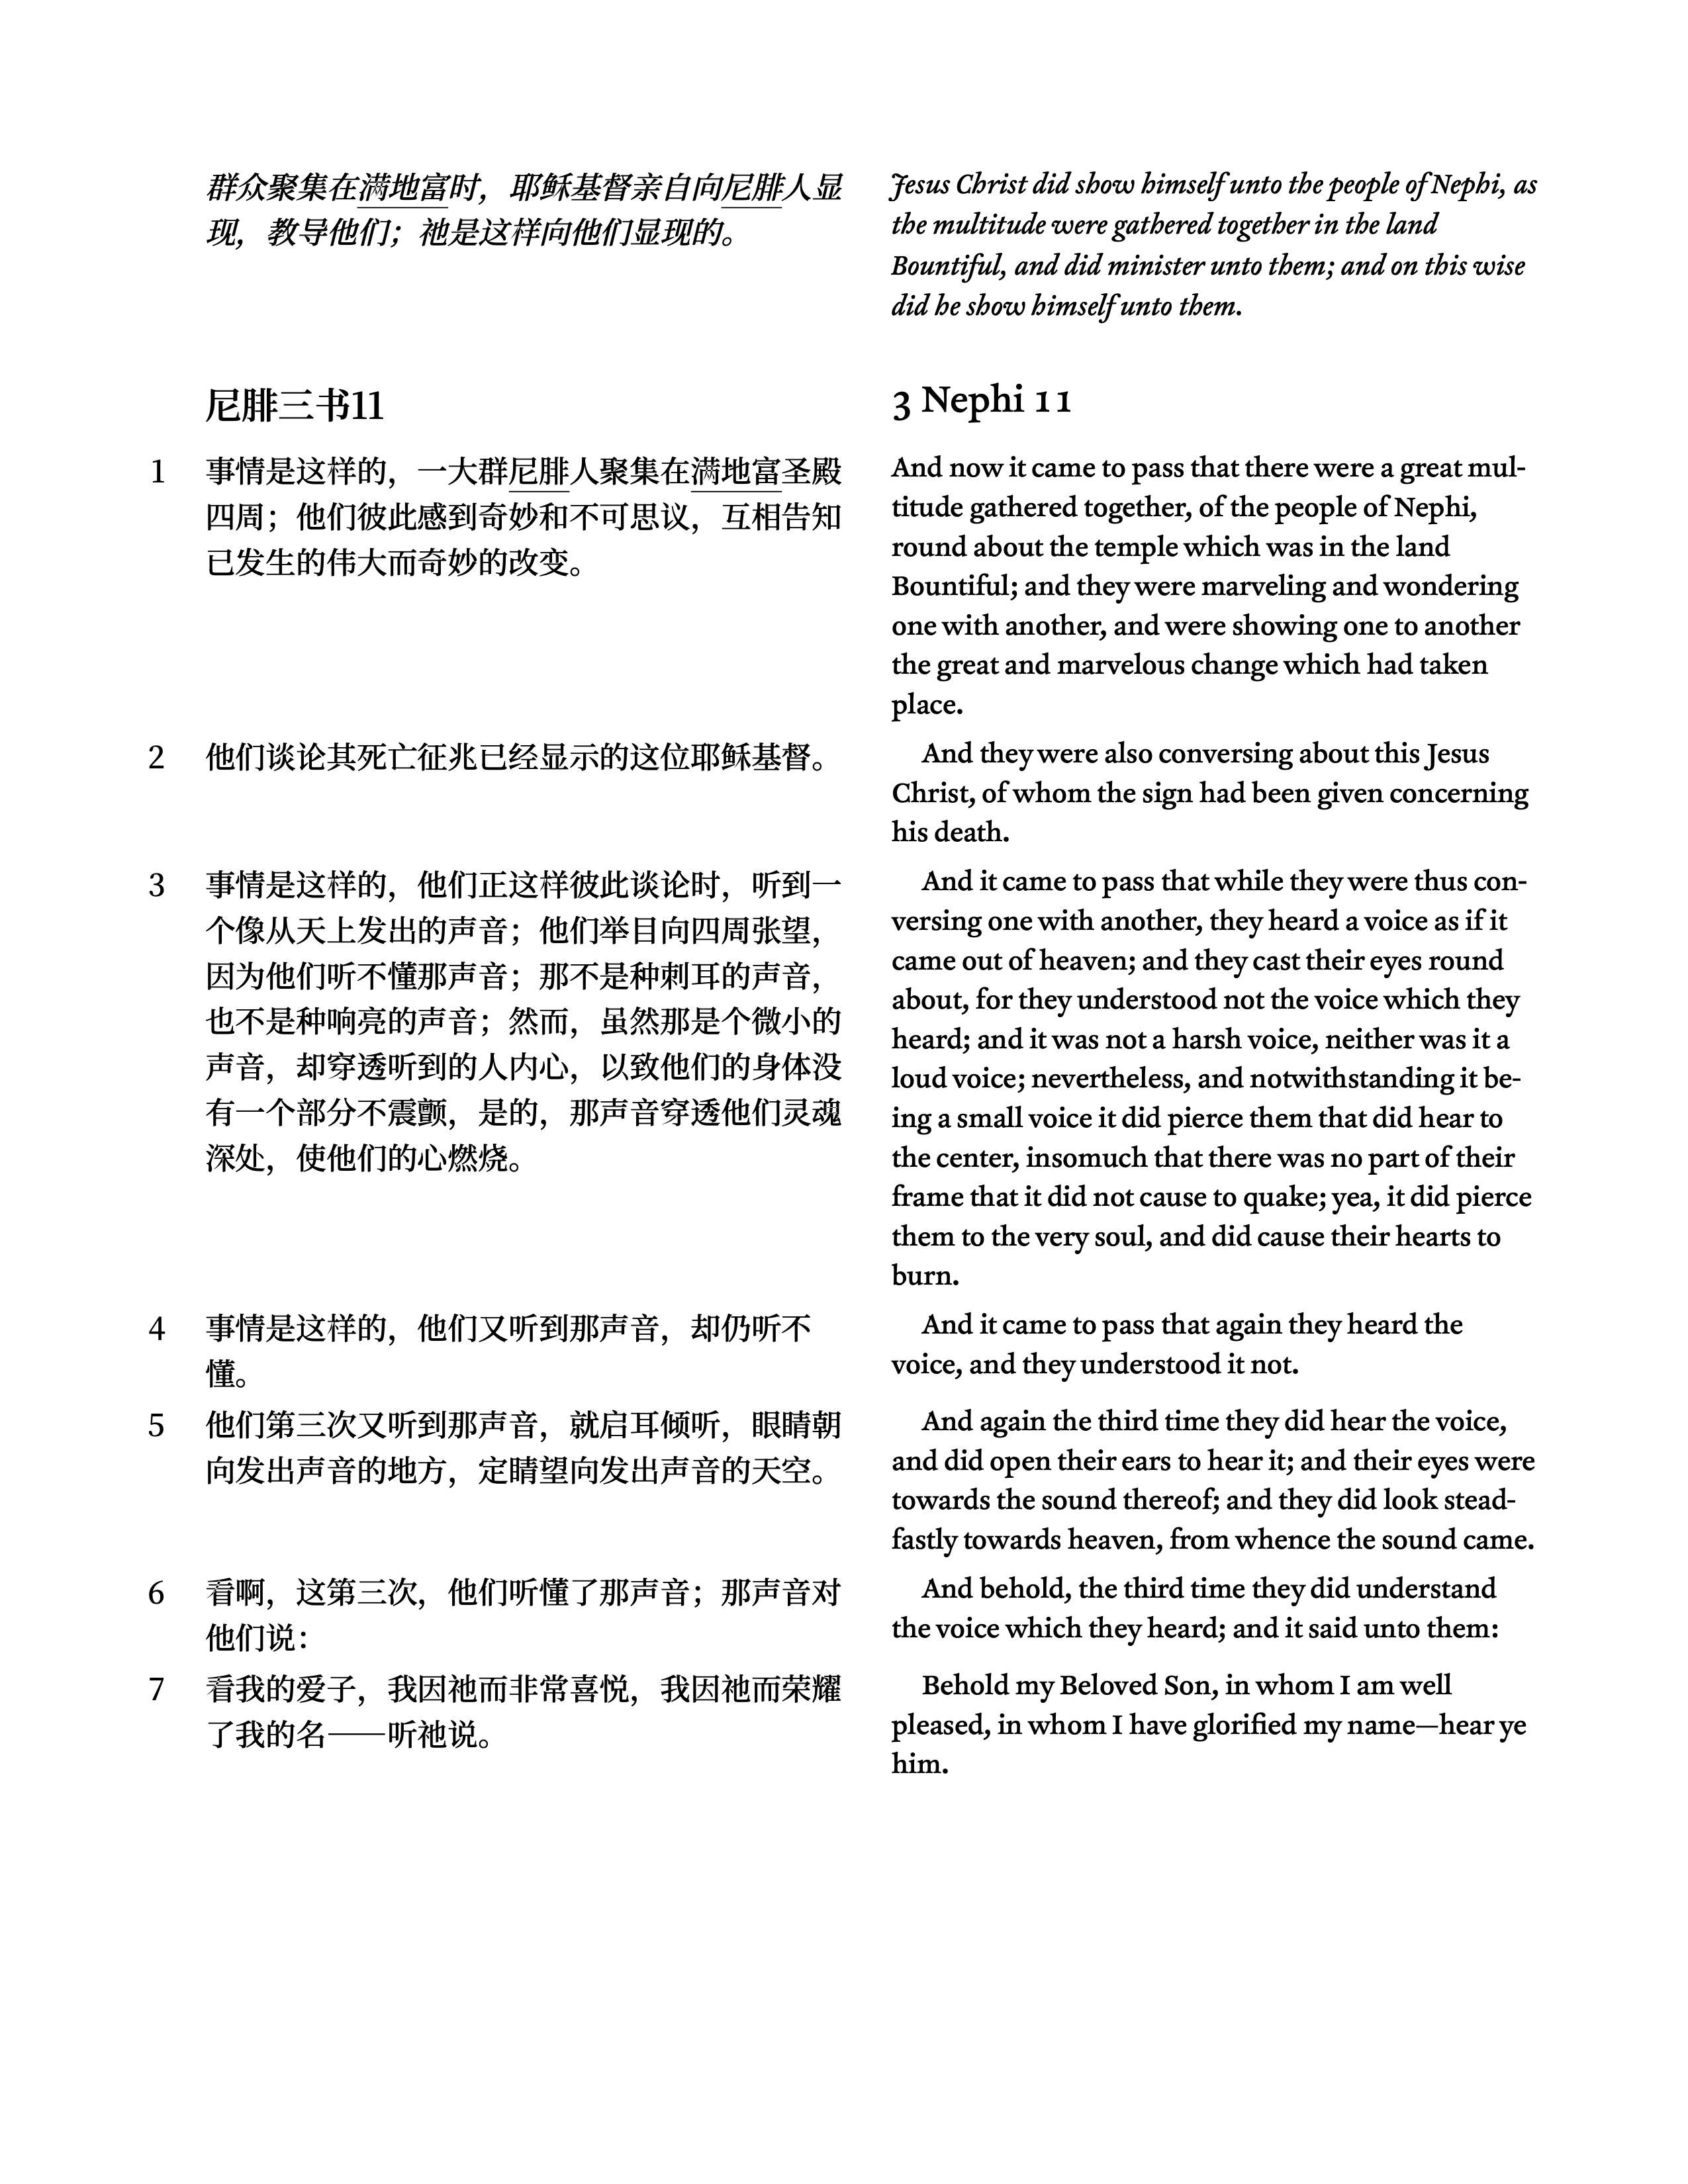 Simplified Chinese–English side-by-side edition